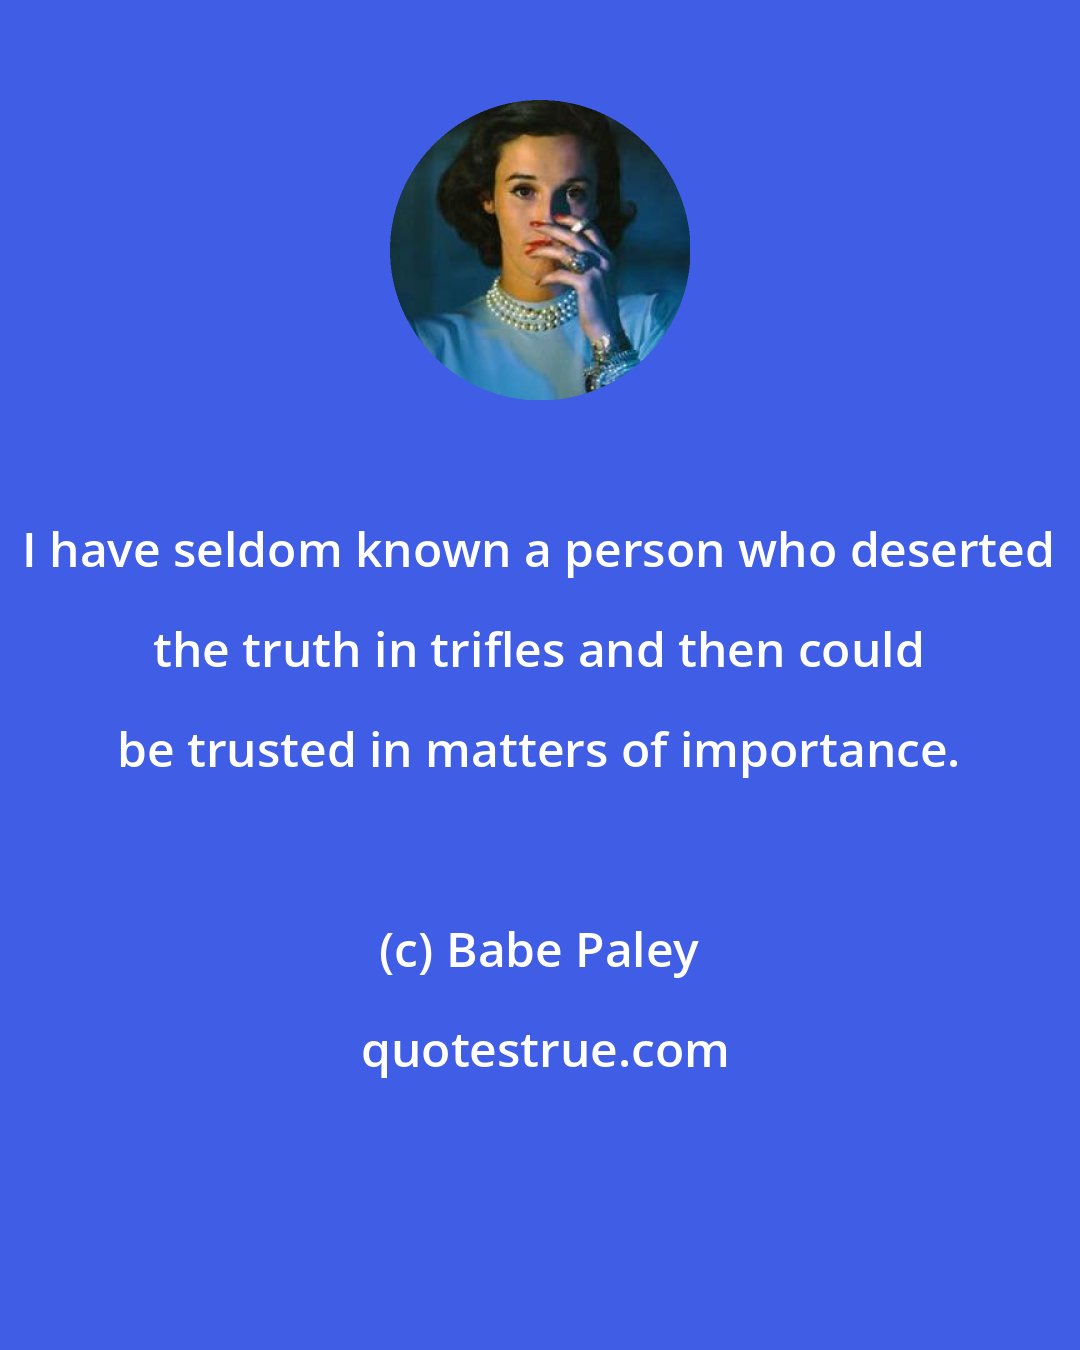 Babe Paley: I have seldom known a person who deserted the truth in trifles and then could be trusted in matters of importance.